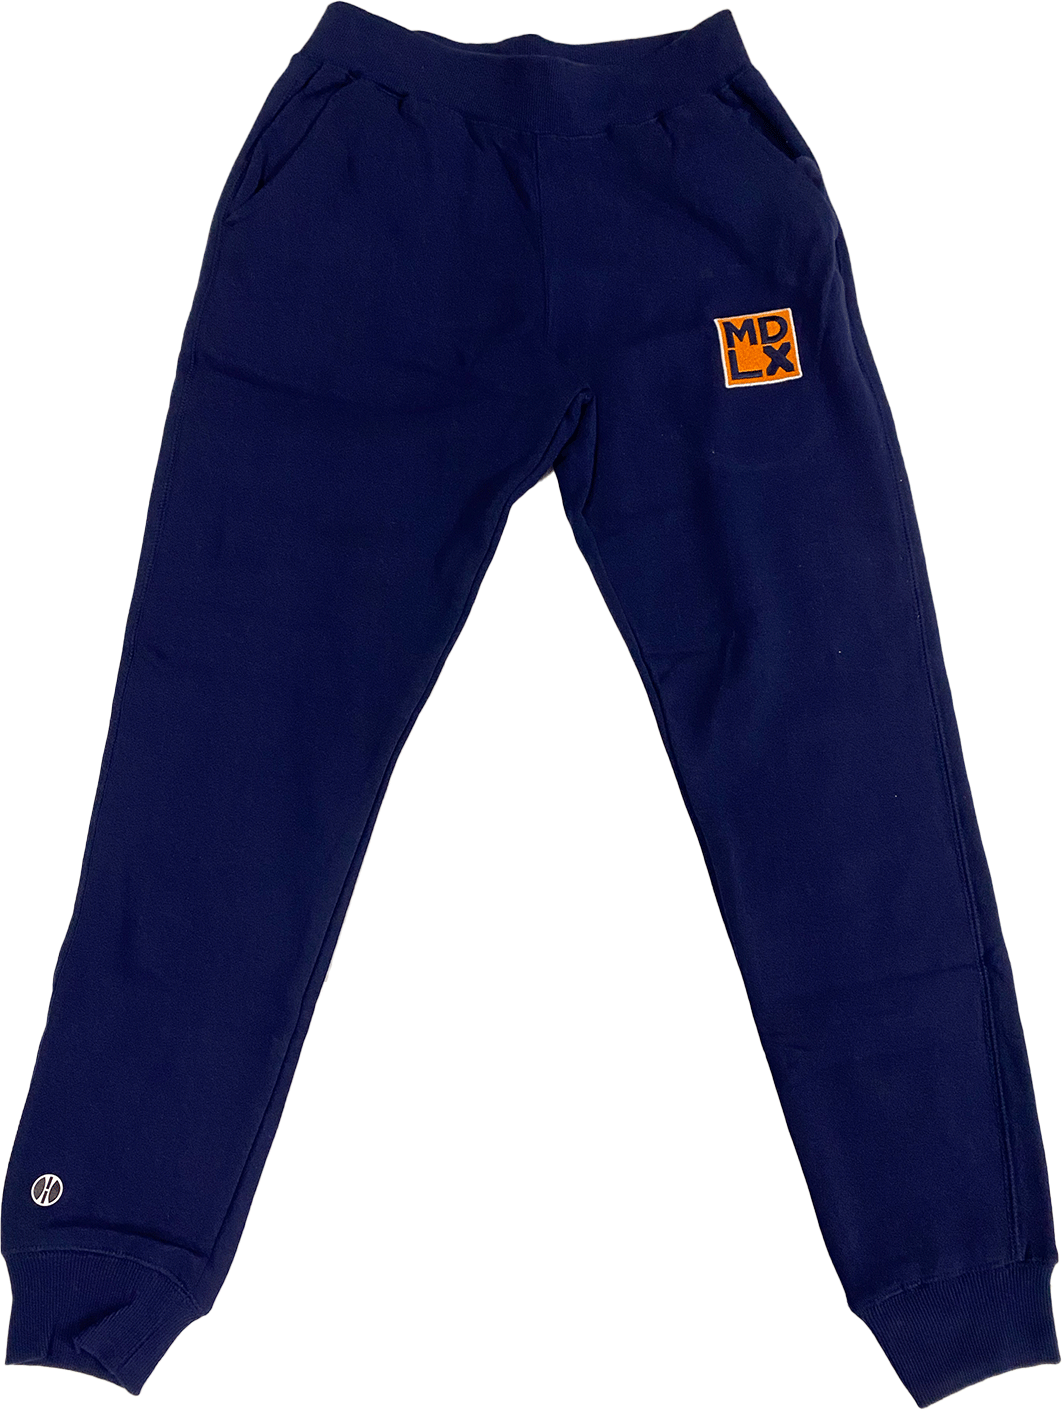 MDLX Navy Blue ColdGear Embroidered Sweatpants